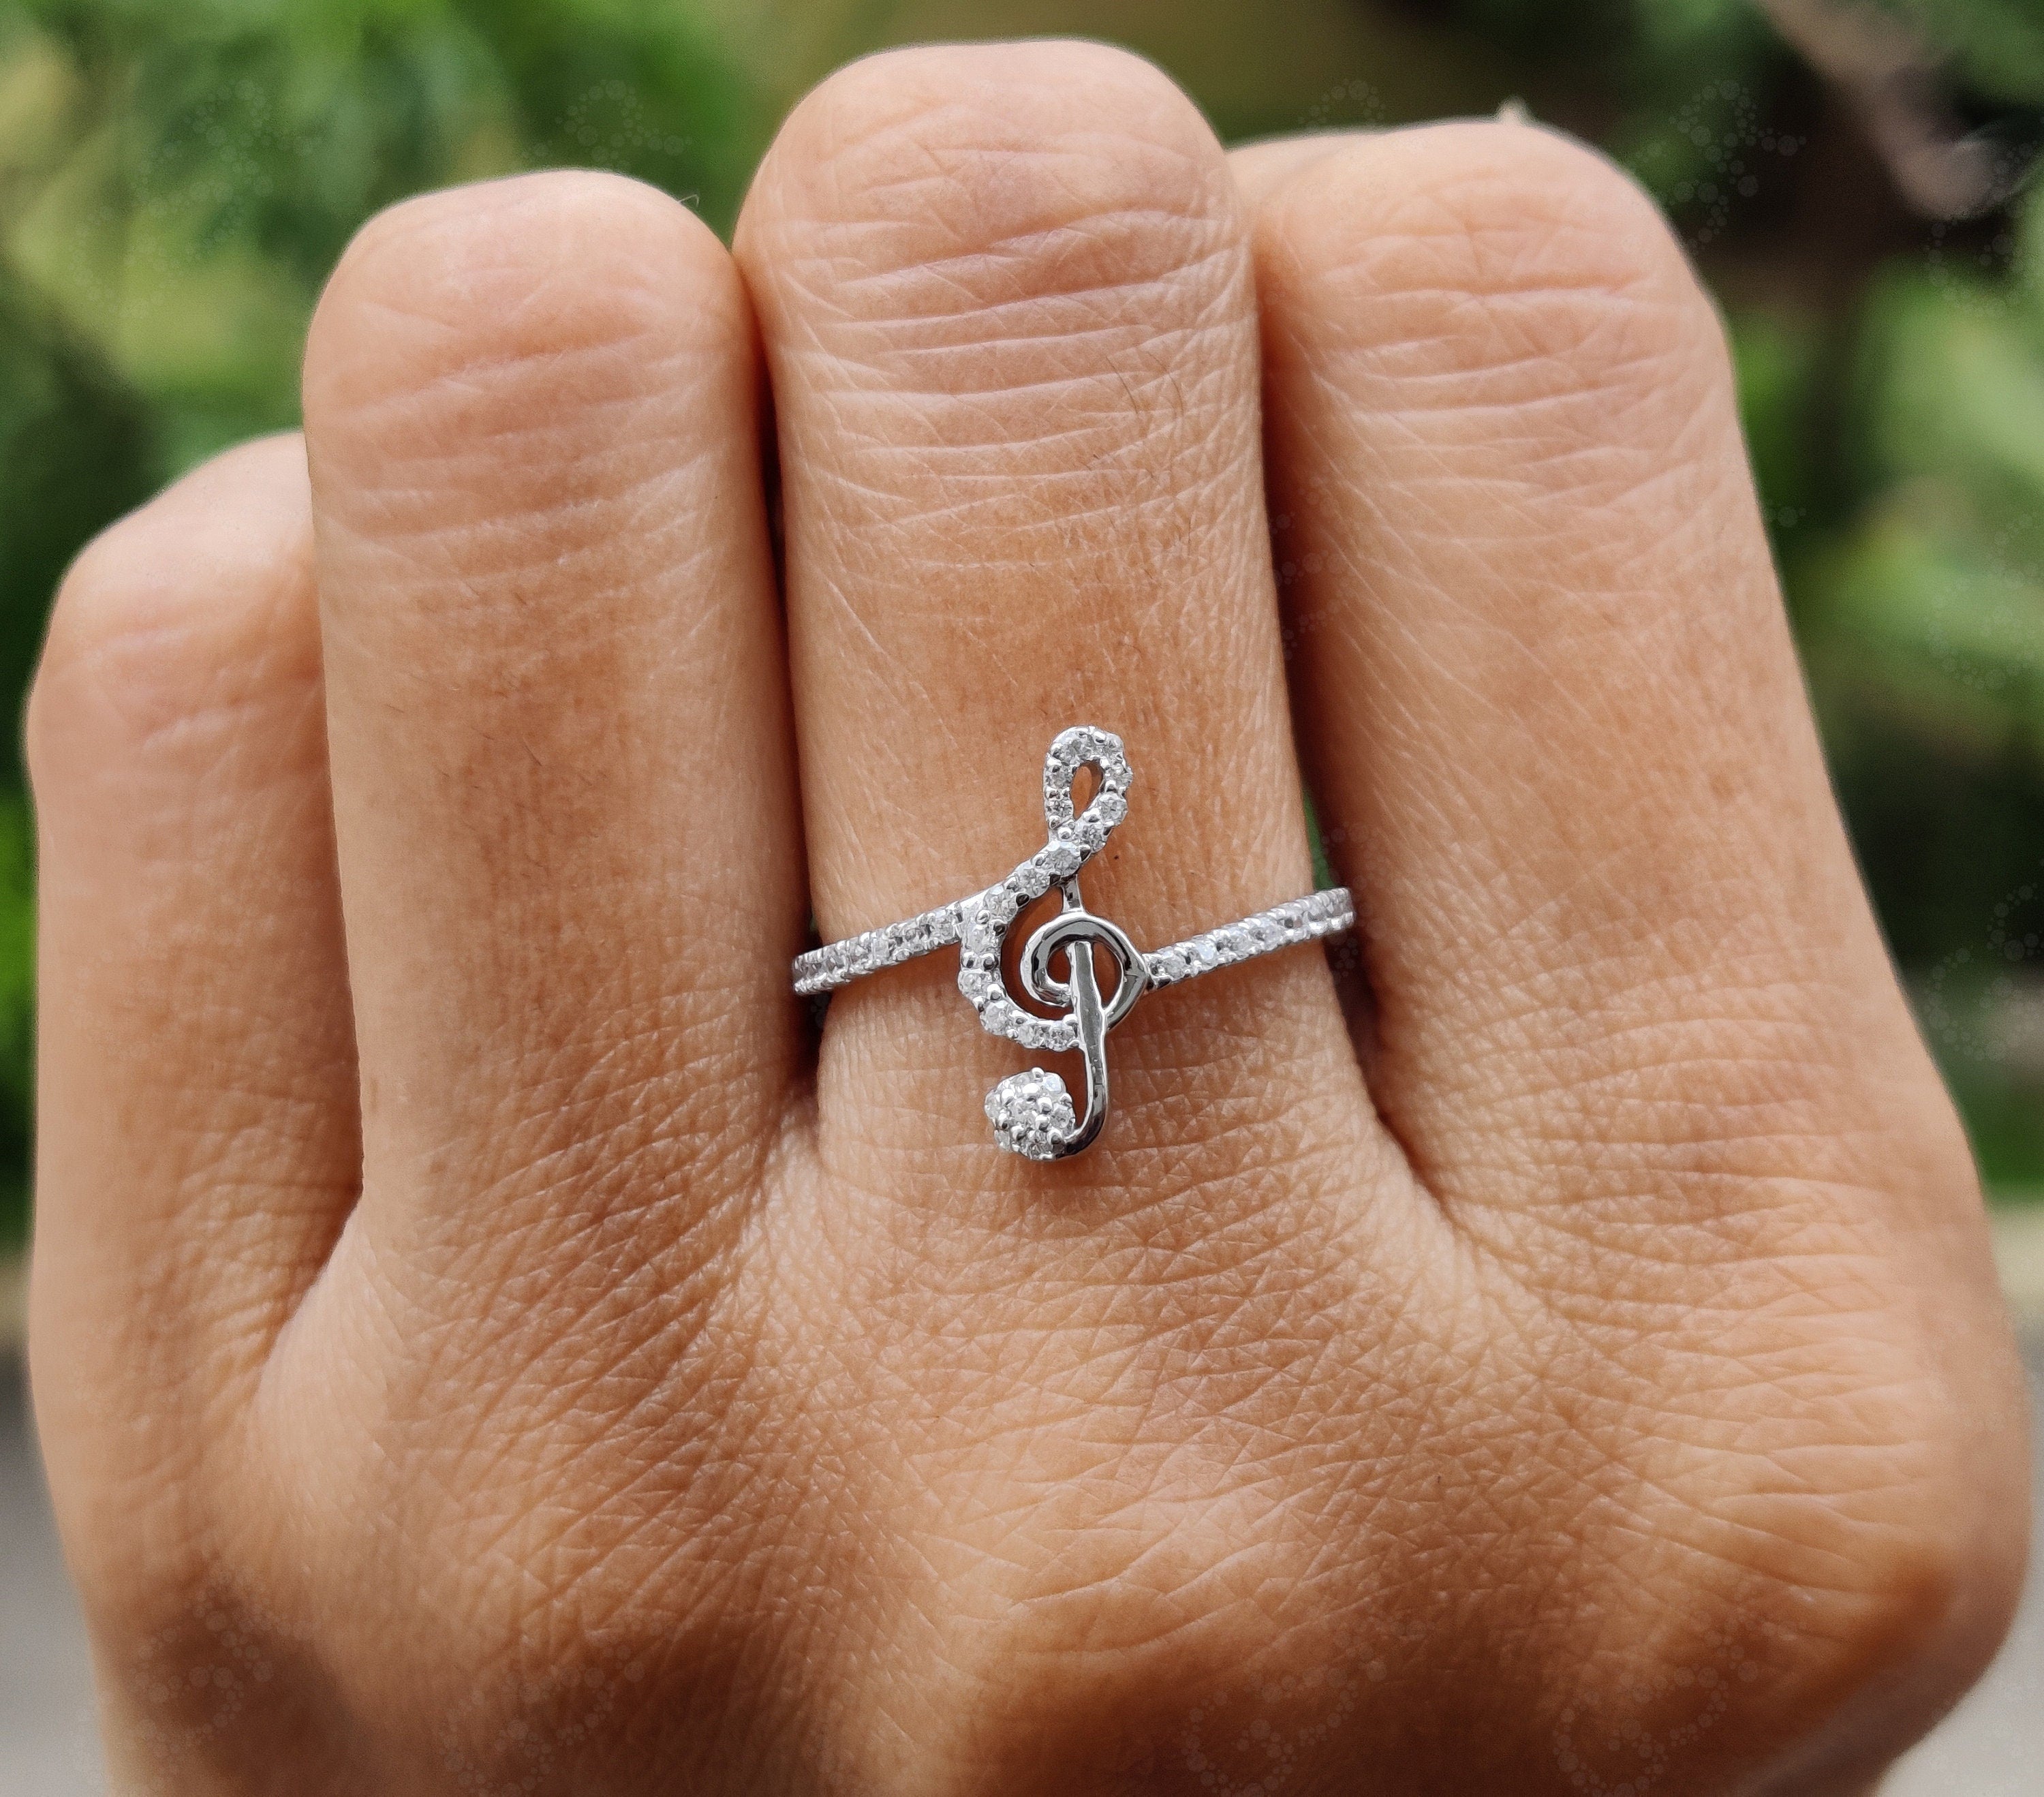 Harmony in Metal: Musical Note Ring, a Stunning Silver and Gold Music Symbol Ring with Shimmering Moissanite Diamonds, the Perfect Treble Clef Ring for Music Lovers, a Melodic Gift of Musical Jewelry